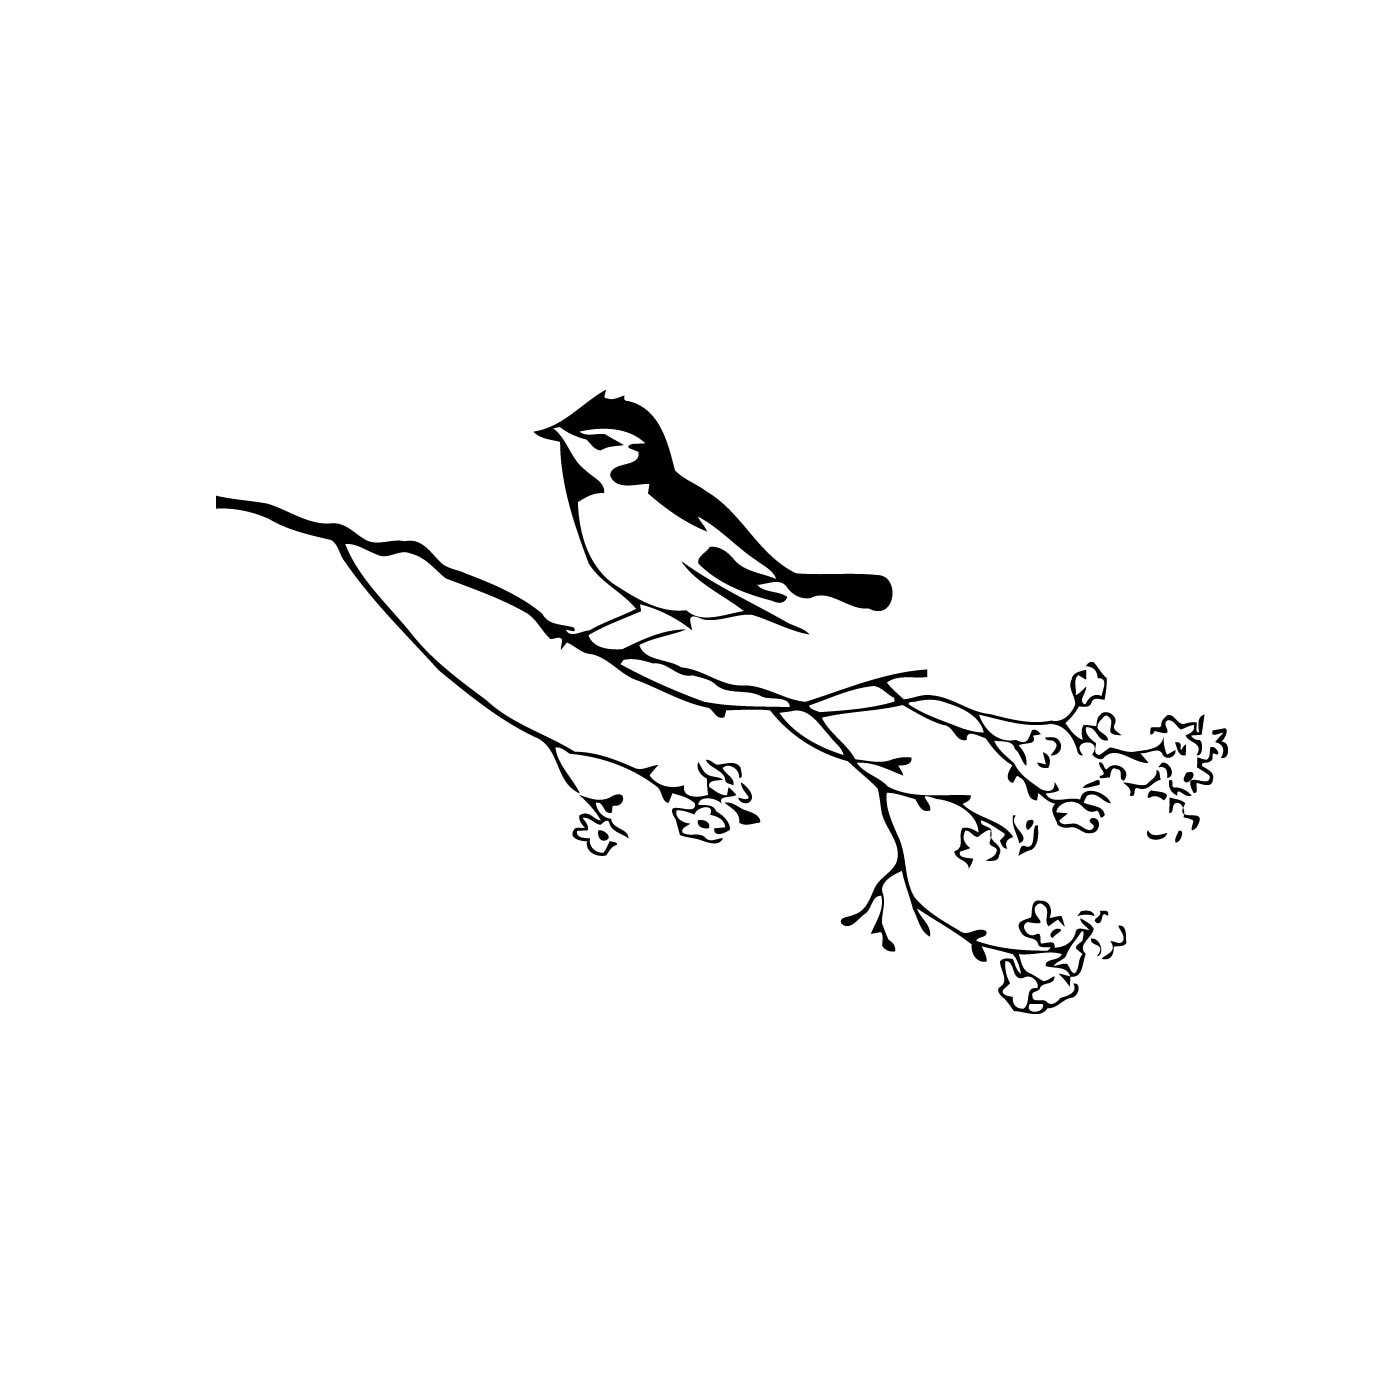 Bird On Branch Vinyl Wall Art (BlackEasy to apply You will get the instructionDimensions 22 inches wide x 35 inches long )